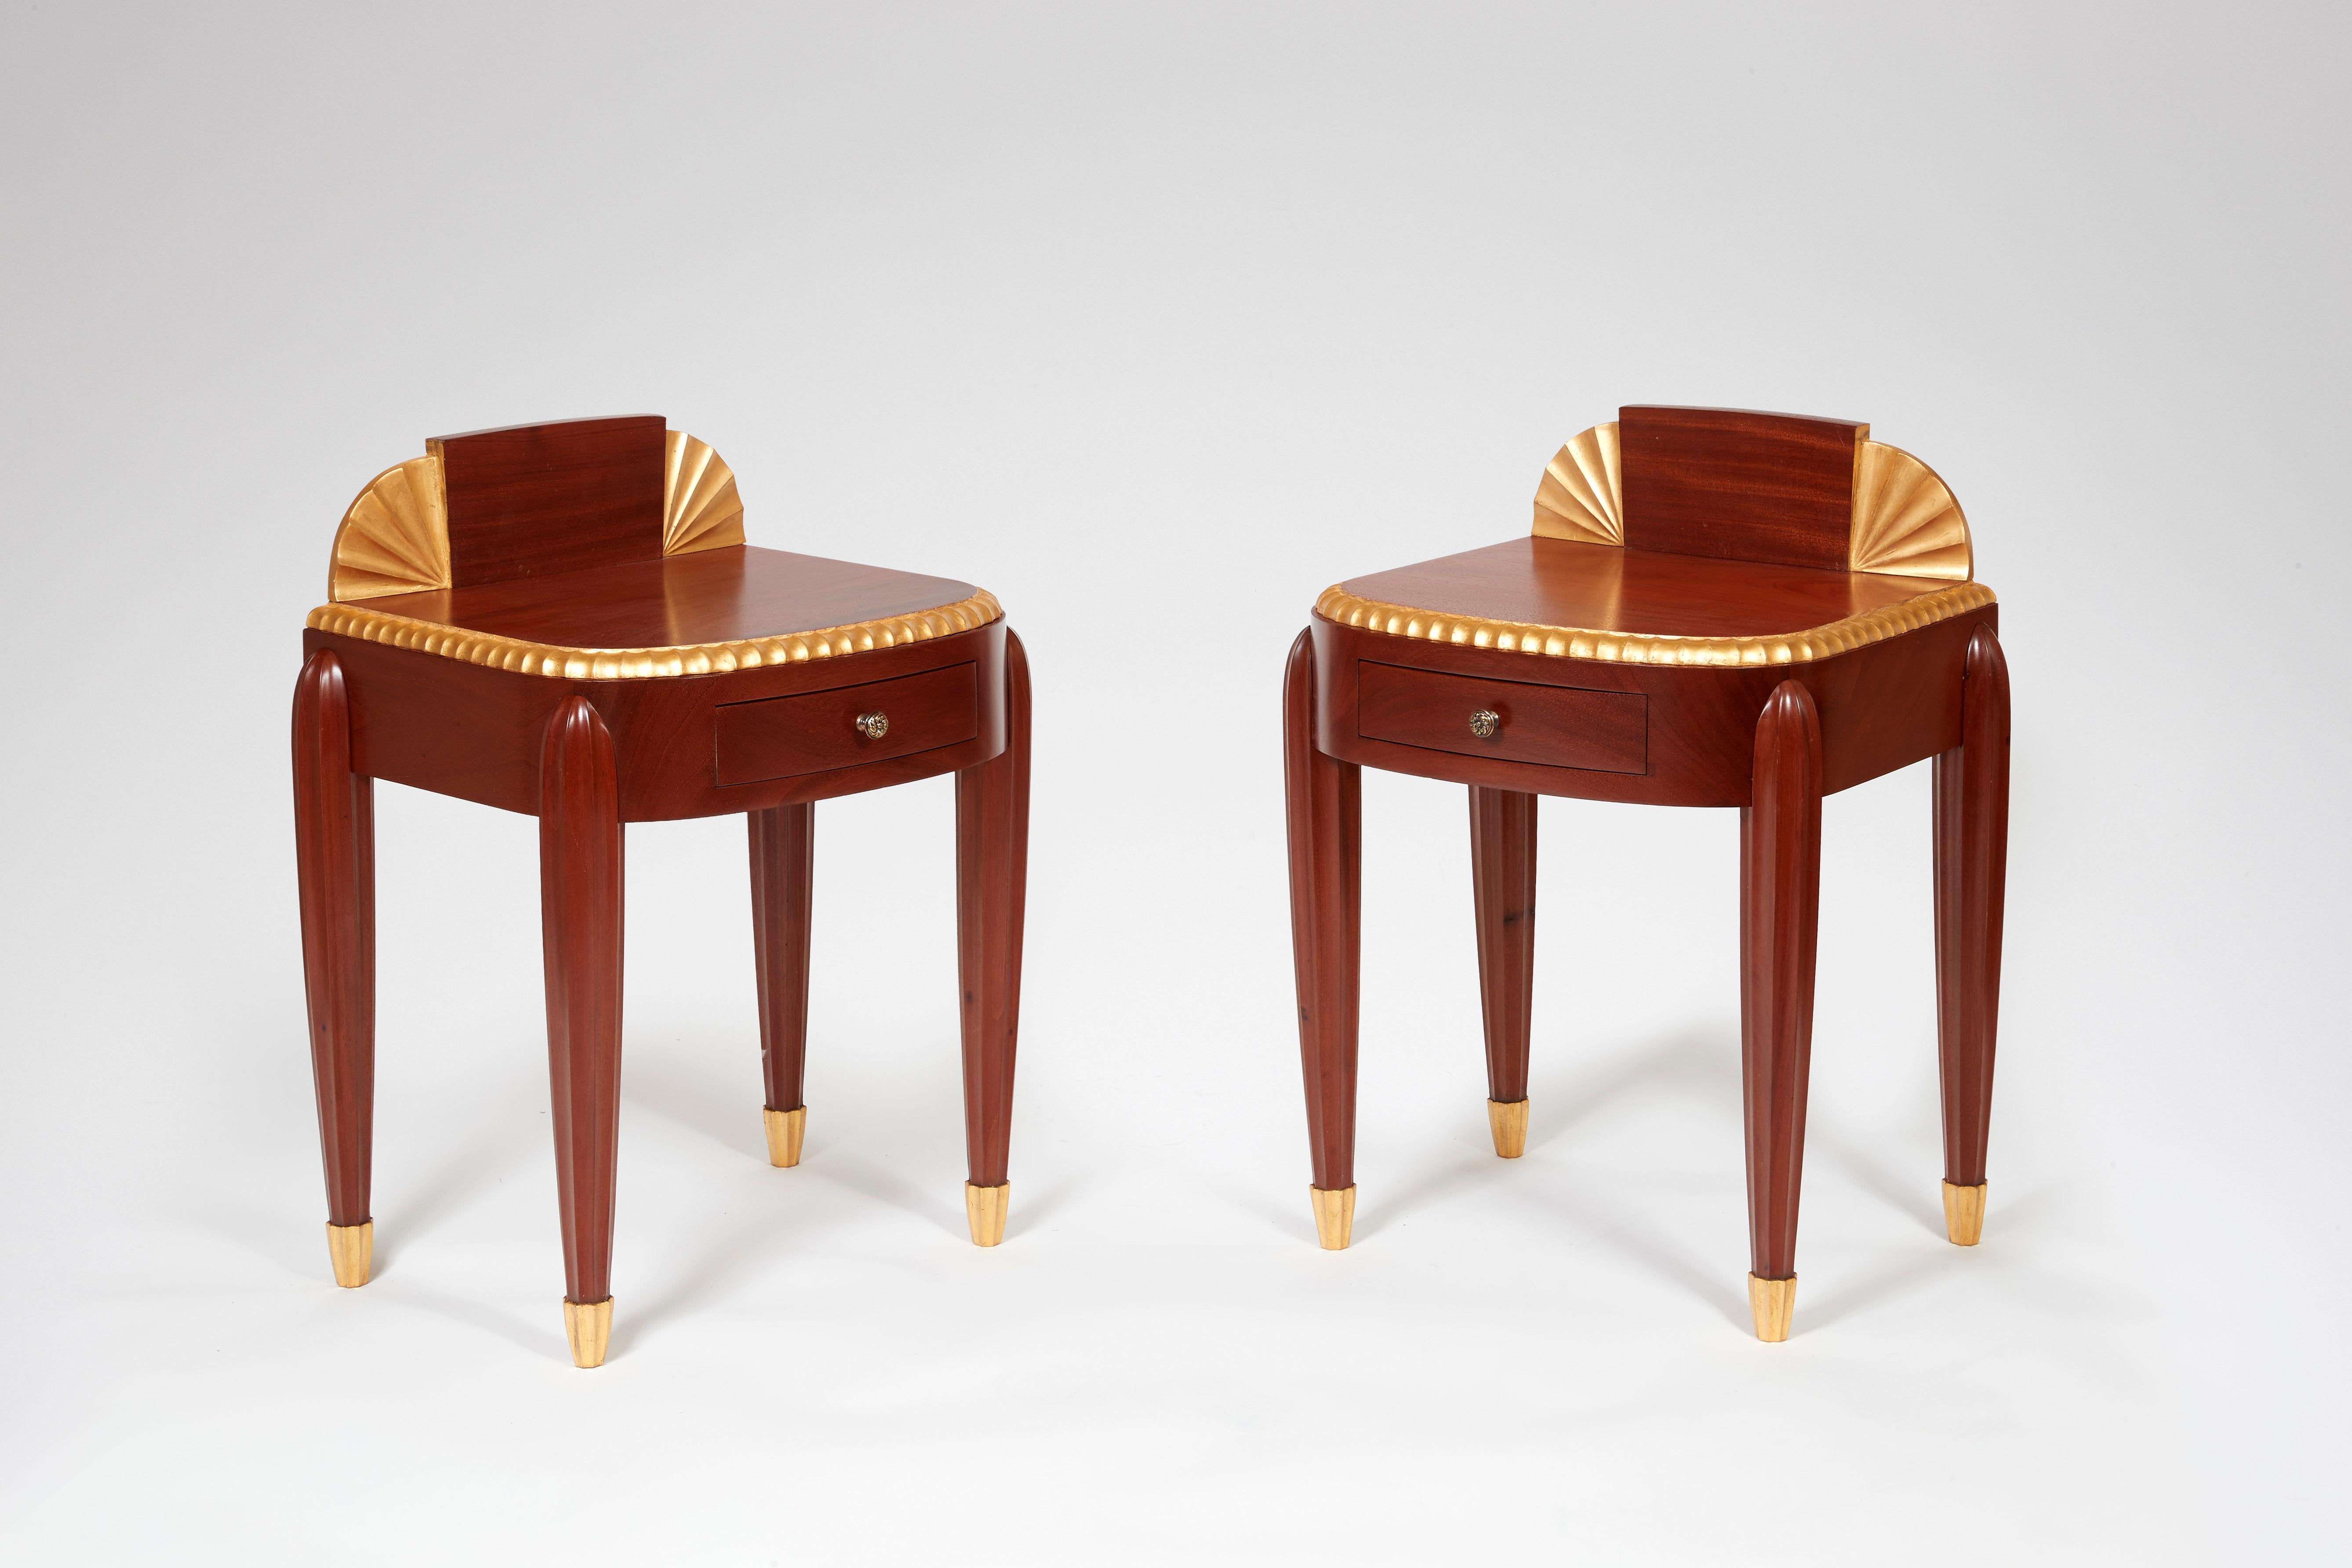 French Jules Leleu, Pair of Bedside Tables, circa 1925